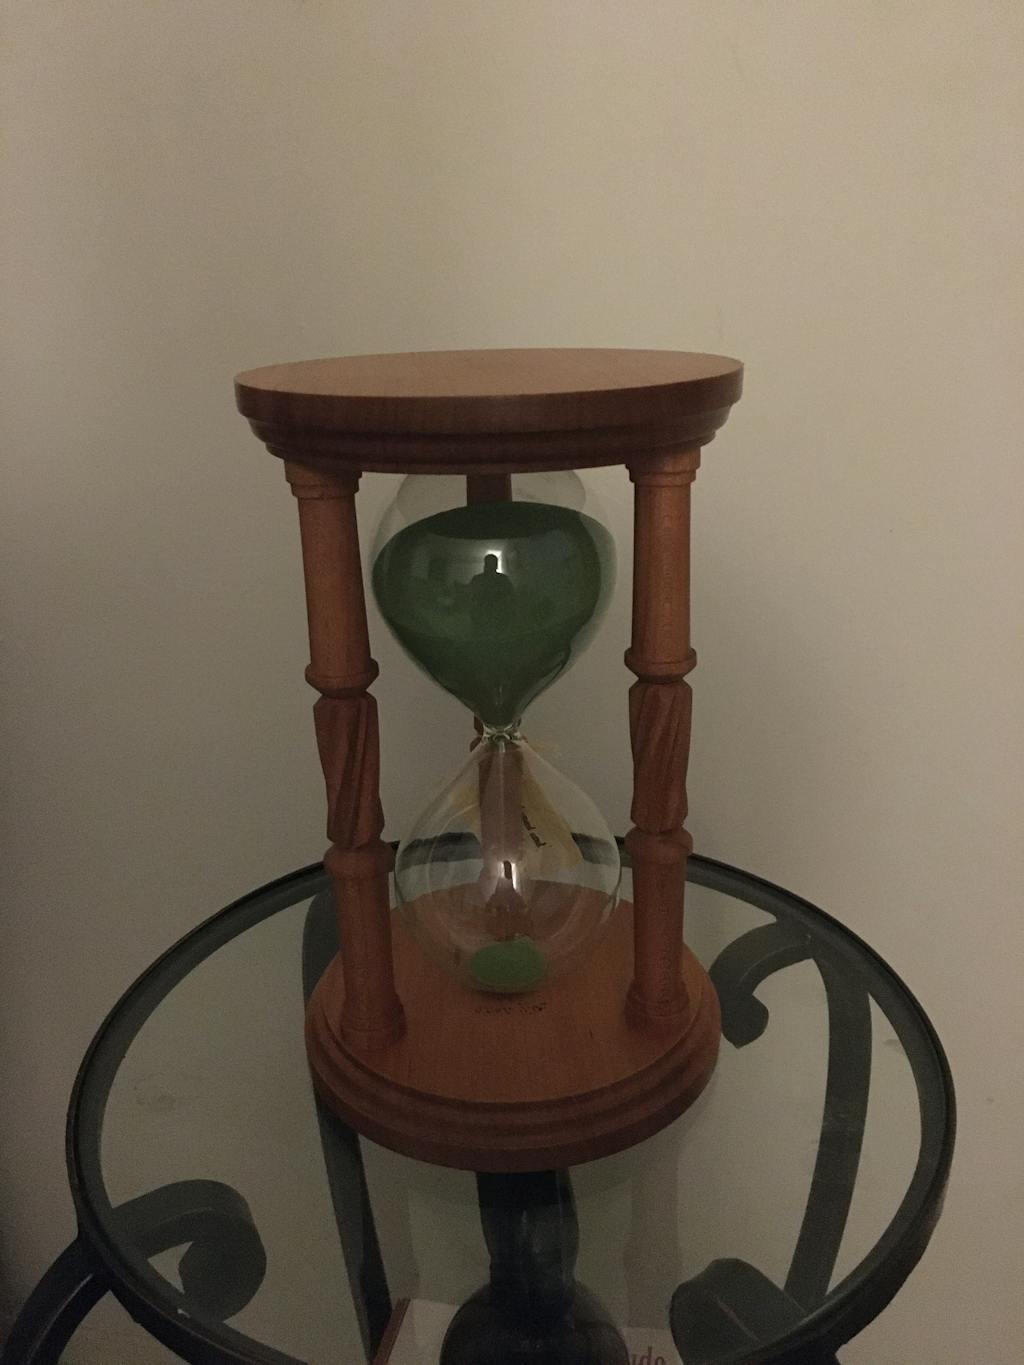 Solid Cherry Wood Hourglass With Spiral Spindles Justhourglasses 0487